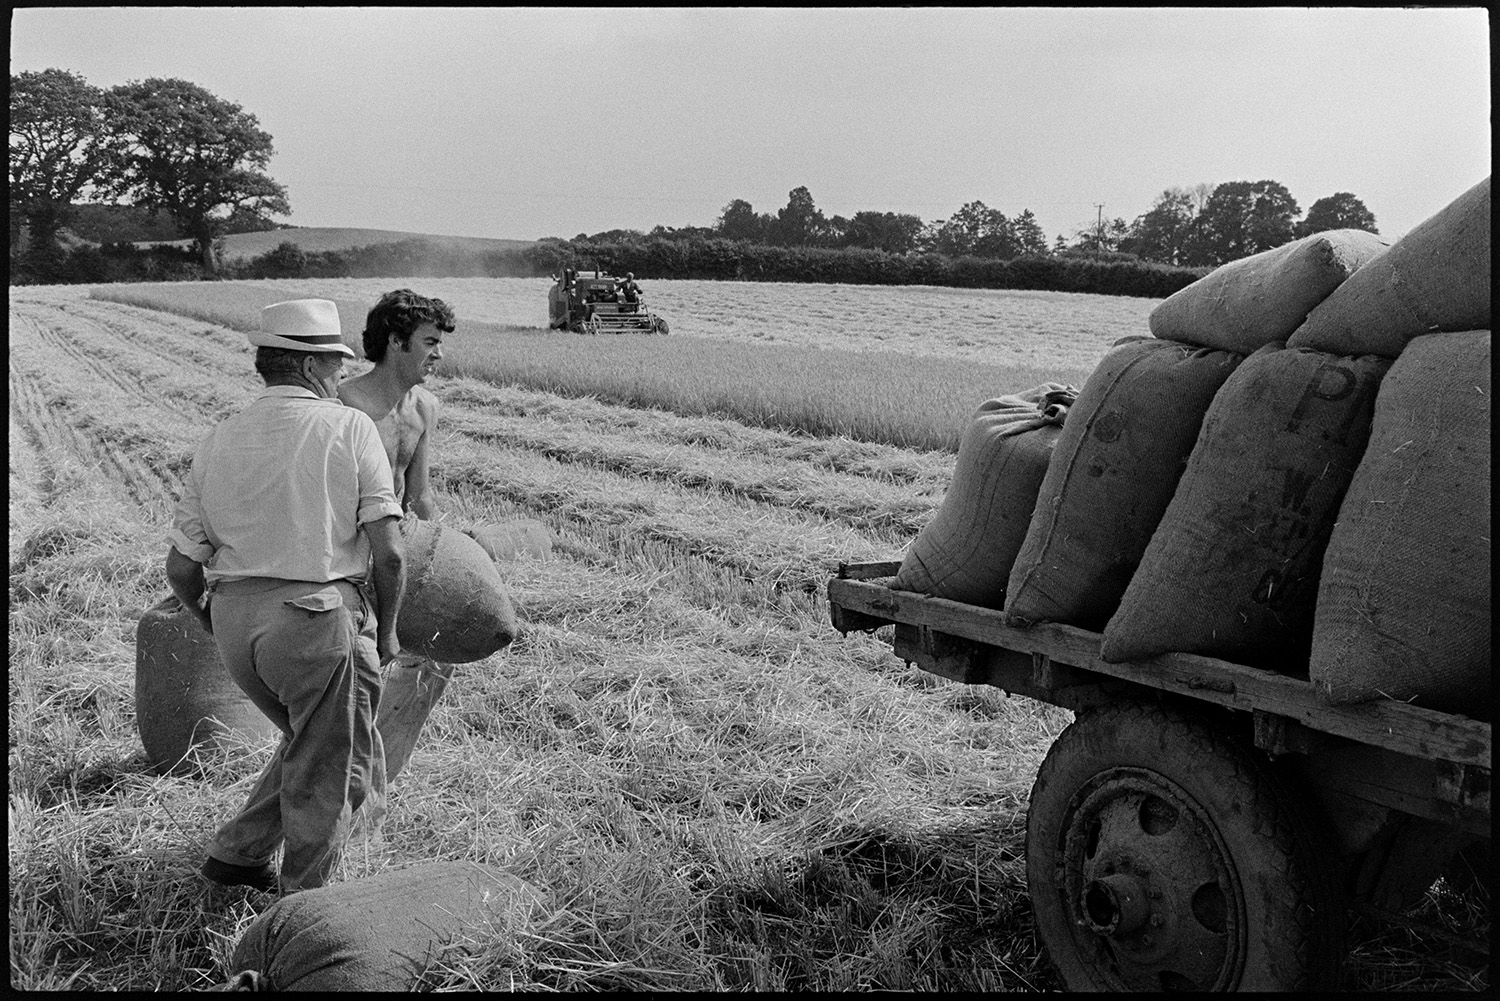 Loading sacks of corn from combine harvester. 
[John Ward and one of his sons loading a sack of grain onto a trailer in a field at Parsonage, Iddesleigh. A combine harvester can be seen in the background.]